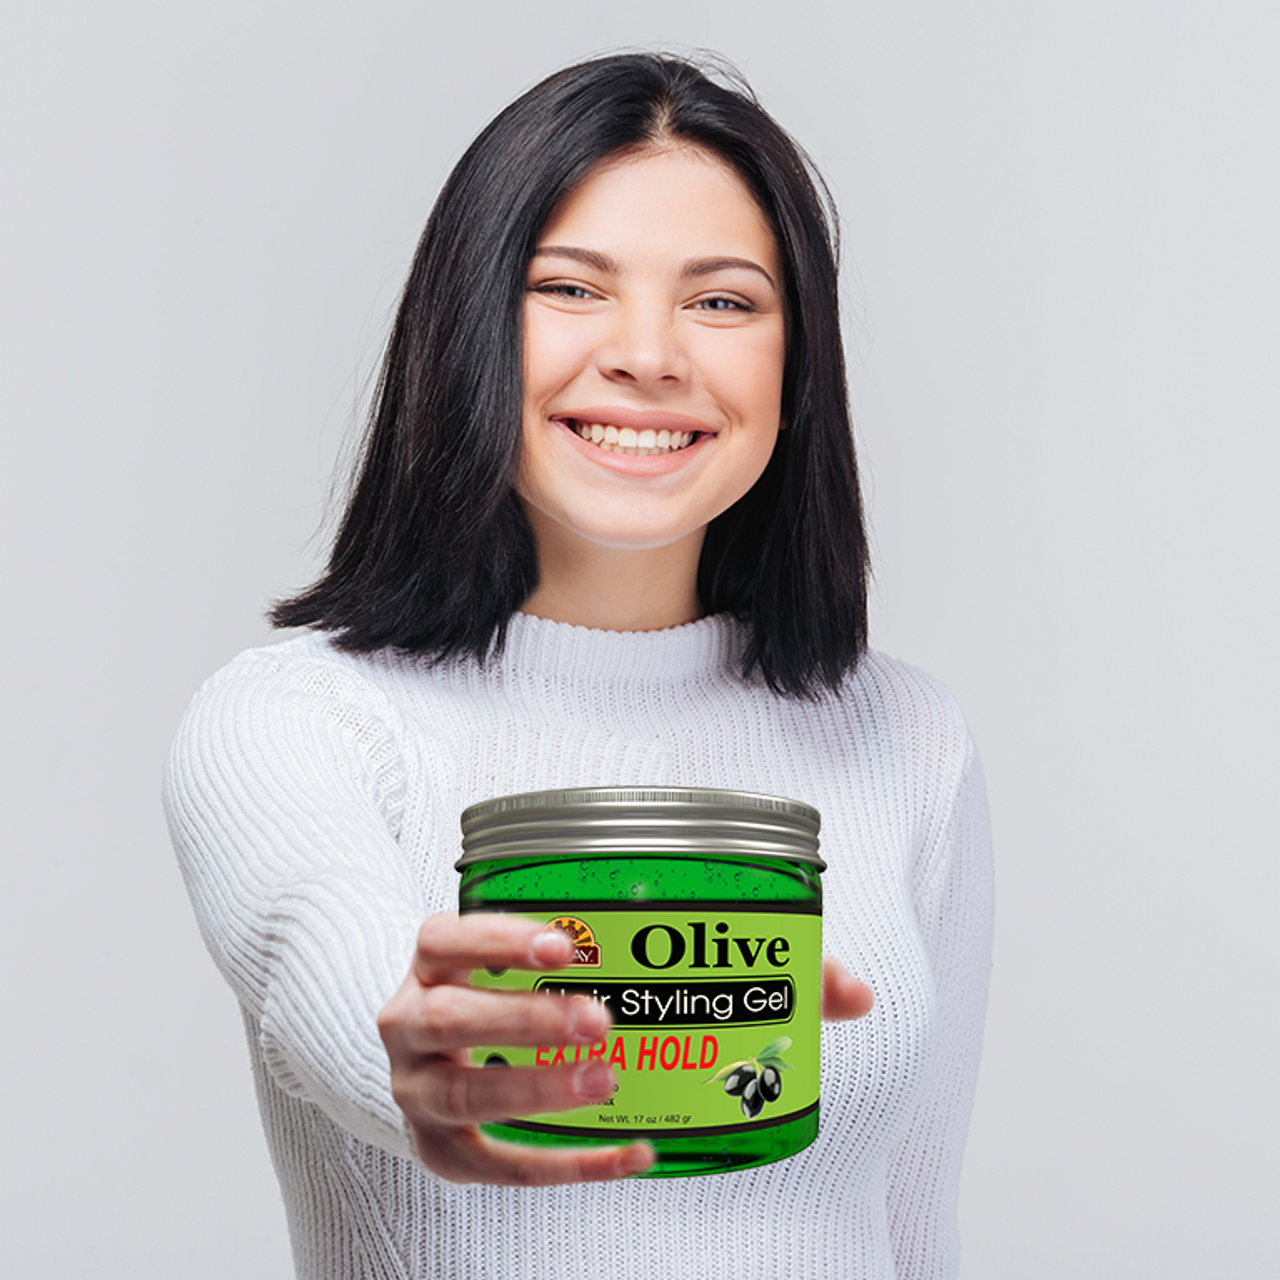 OKAY OLIVE HAIR STYLING GEL, EXTRA HOLD 17OZ 